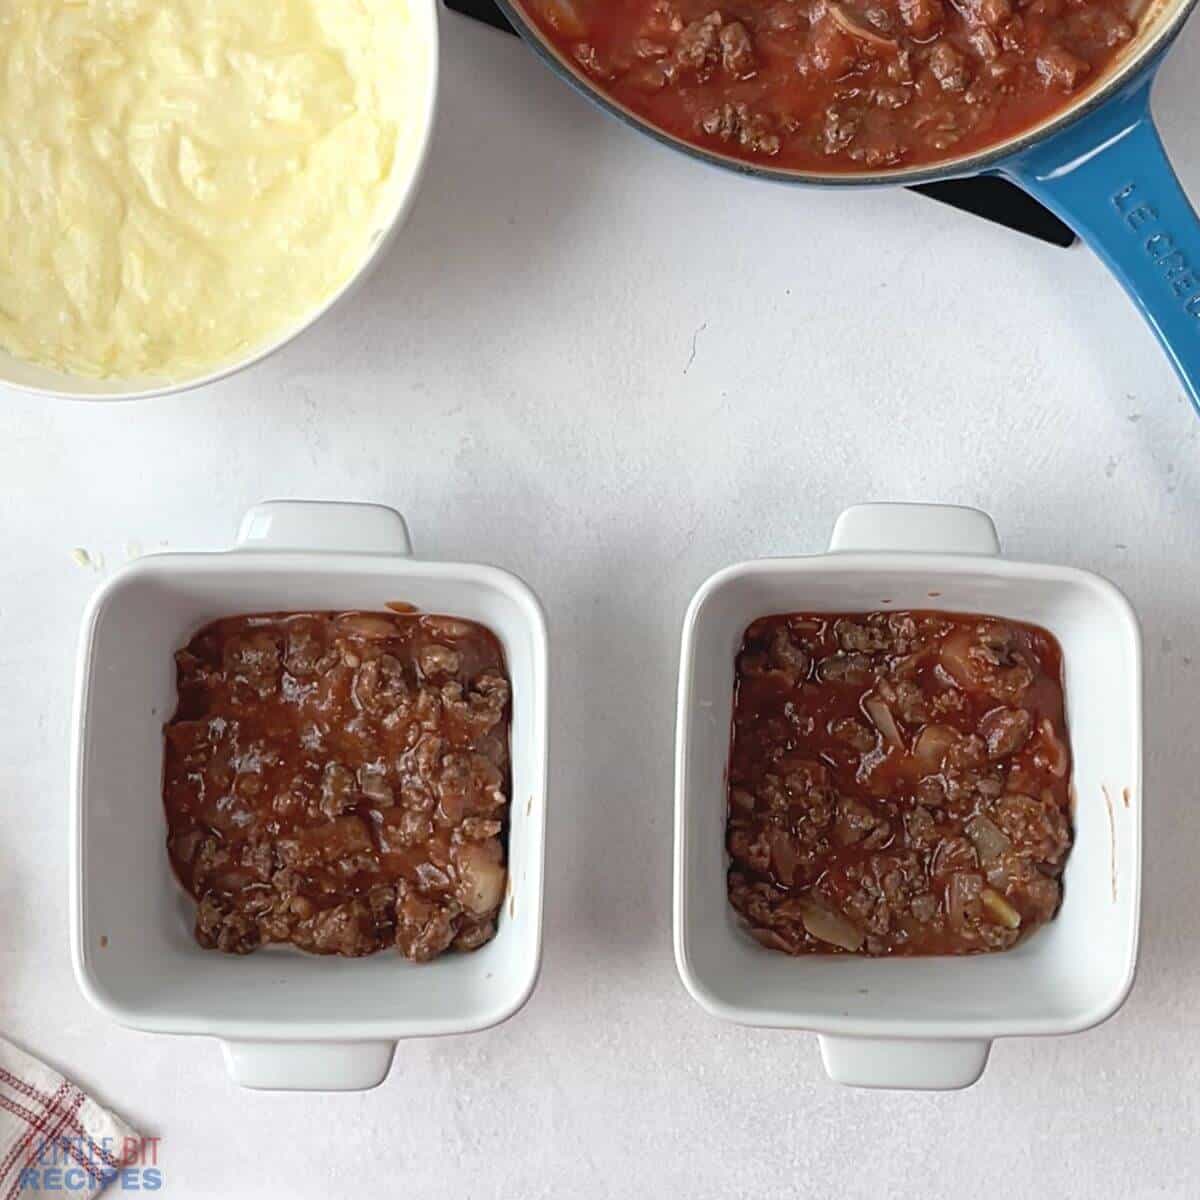 meat sauce layer in mini baking pans.